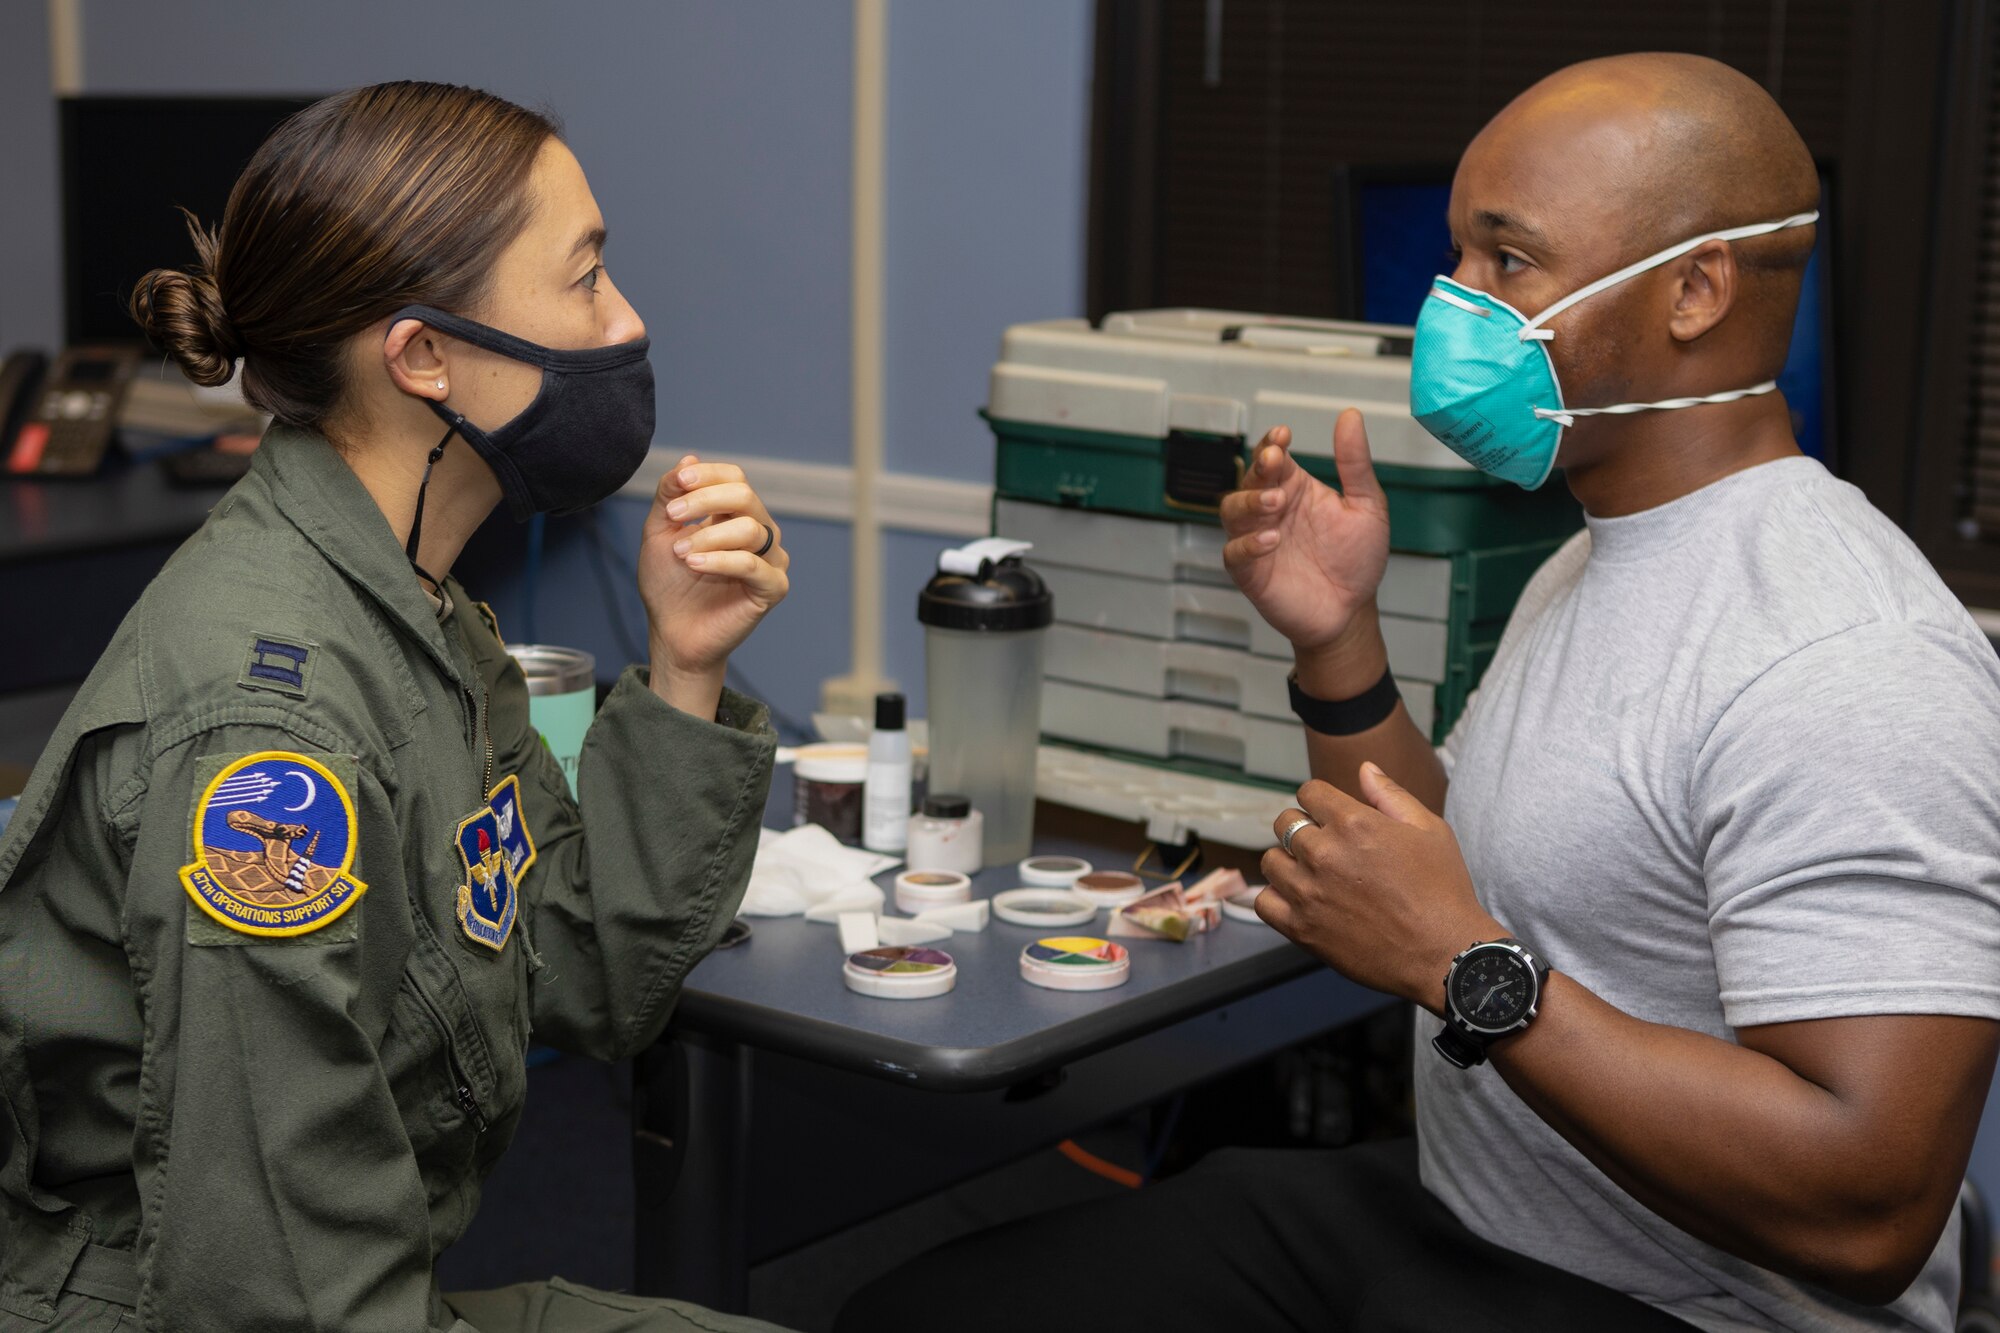 Staff Sgt. Cameron Chisolm, 47th Operations Support Squadron Aerospace & Physiology NCO in charge of administration and scheduling, applies moulage to Capt. Ally Bergman, 47th Operations Support Squadron Aerospace & Physiology Flight commander, on Oct. 27, 2020 at Laughlin Air Force Base, Texas. Bergman was one of numerous people from across base who wore a made-up bruise for the Black Eye Campaign to bring focus to Domestic Violence Awareness Month. (Courtesy Photo)